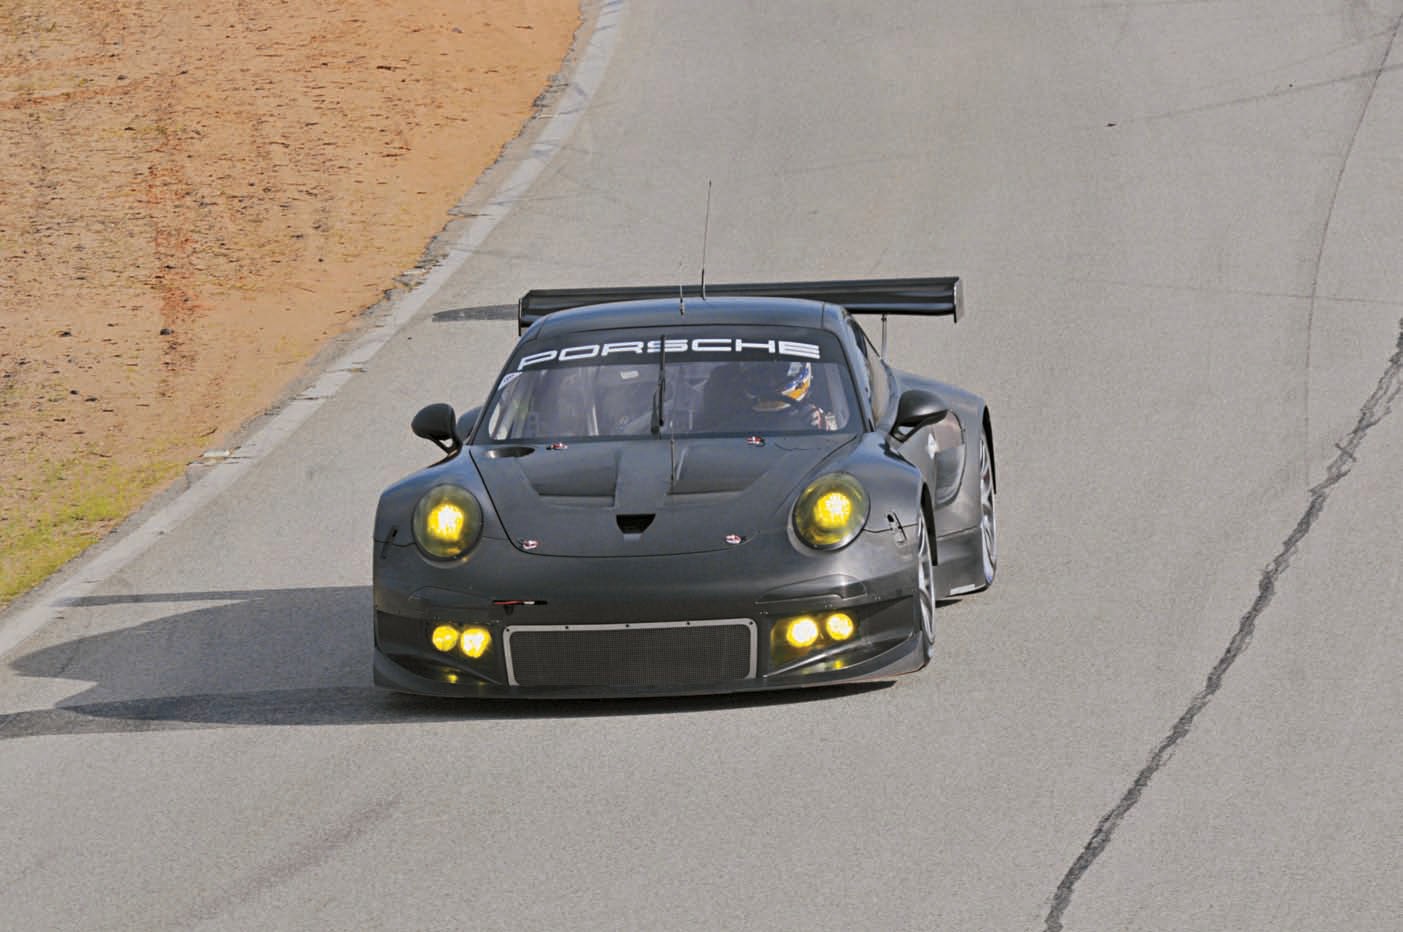 At the end of February 2013, Porsche unveiled its GT3 RSR, meant for Le Mans and other classics of endurance. The World Endurance Championship series began at Silverstone in mid-April where the car first met its competitors. Porsche Presse